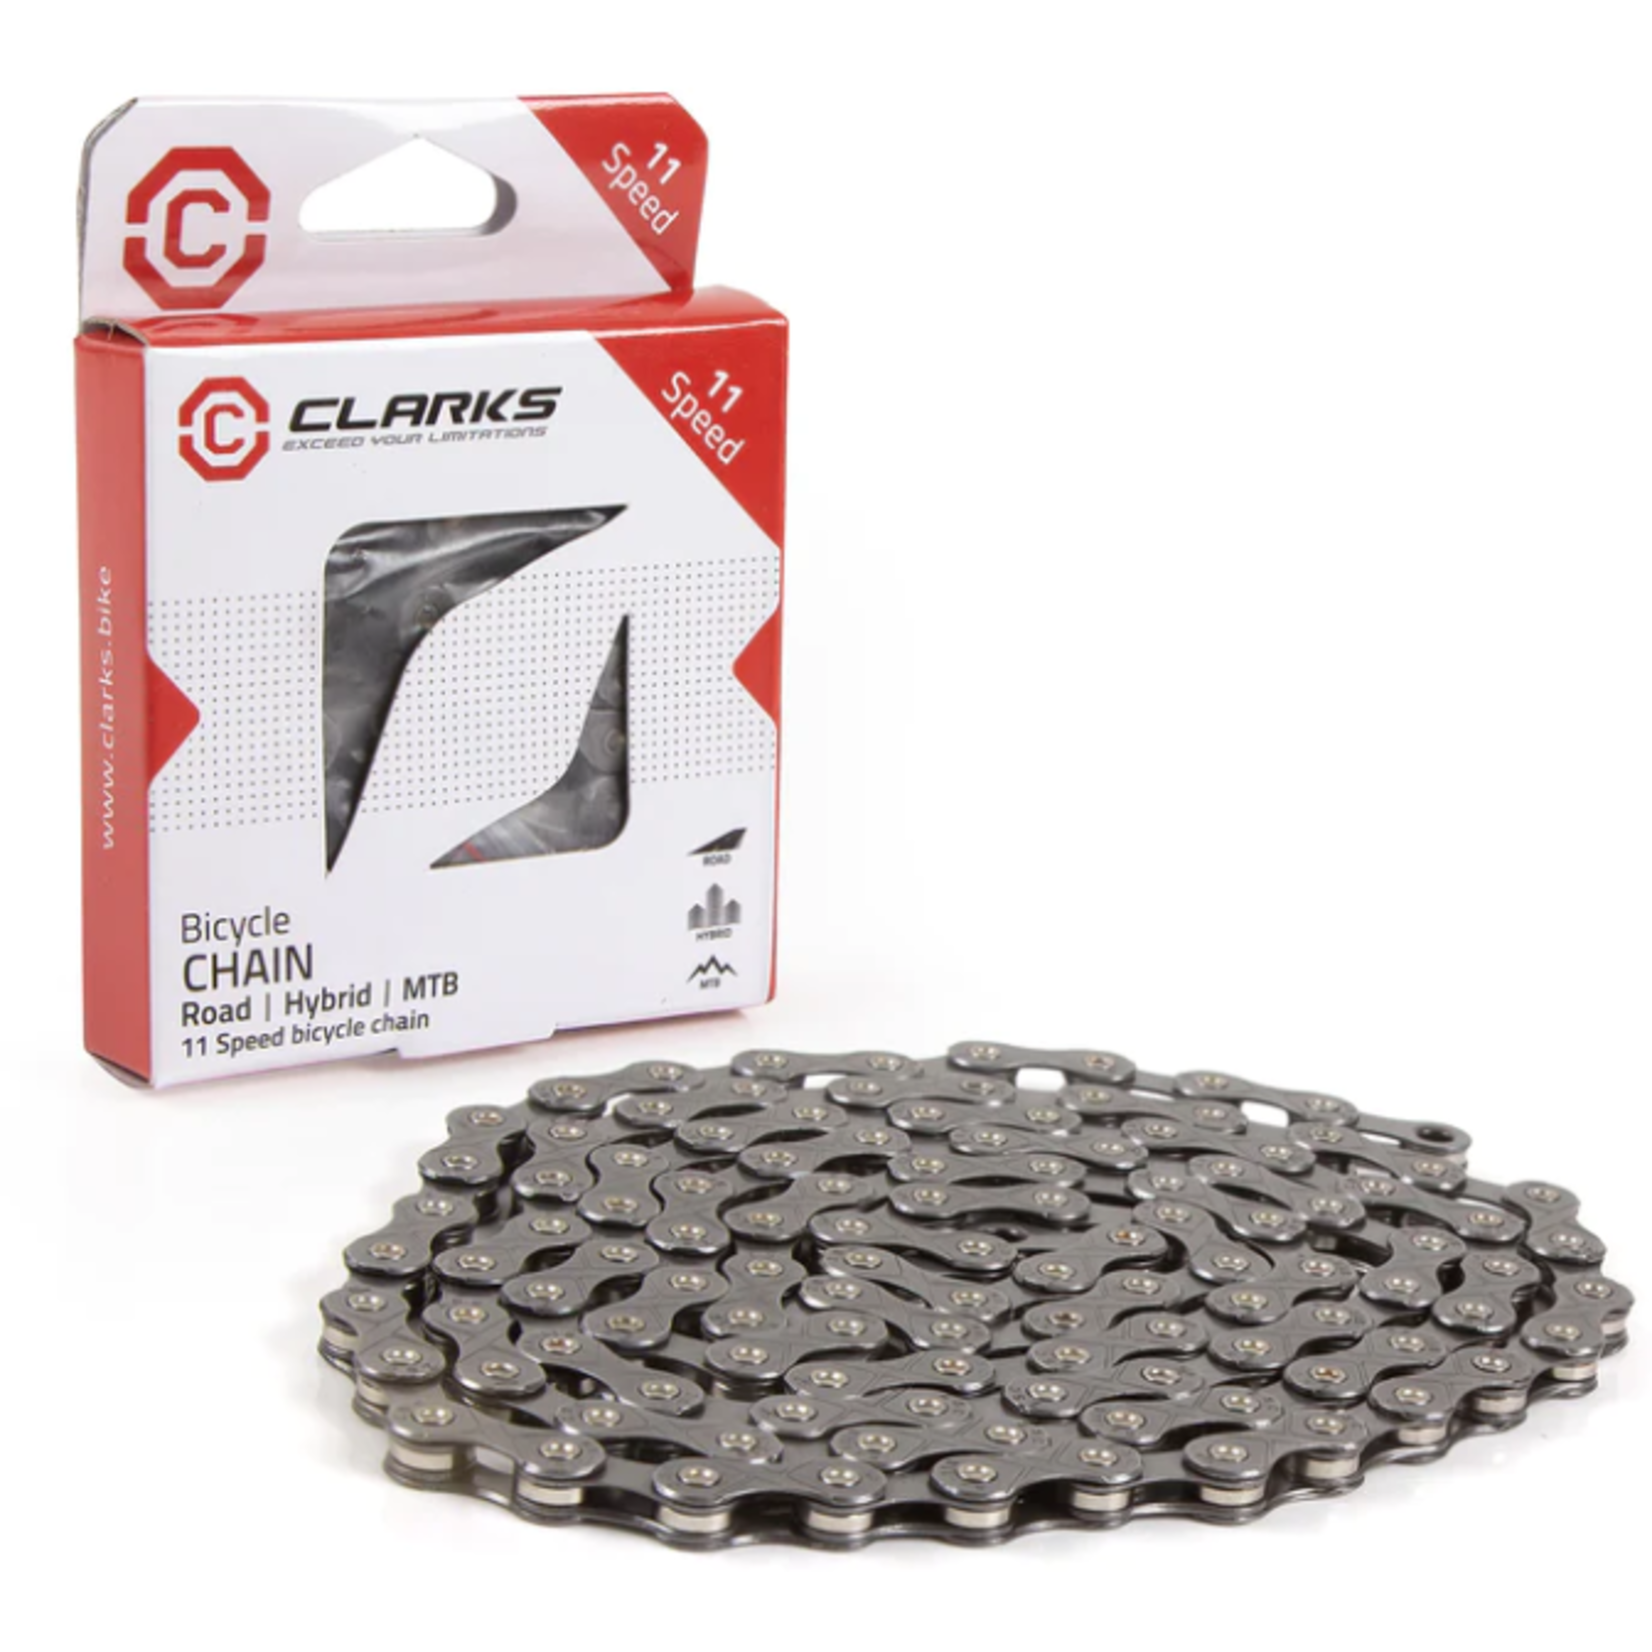 Clarks Clarks C11 11sp Chain, Silver - - waxing available